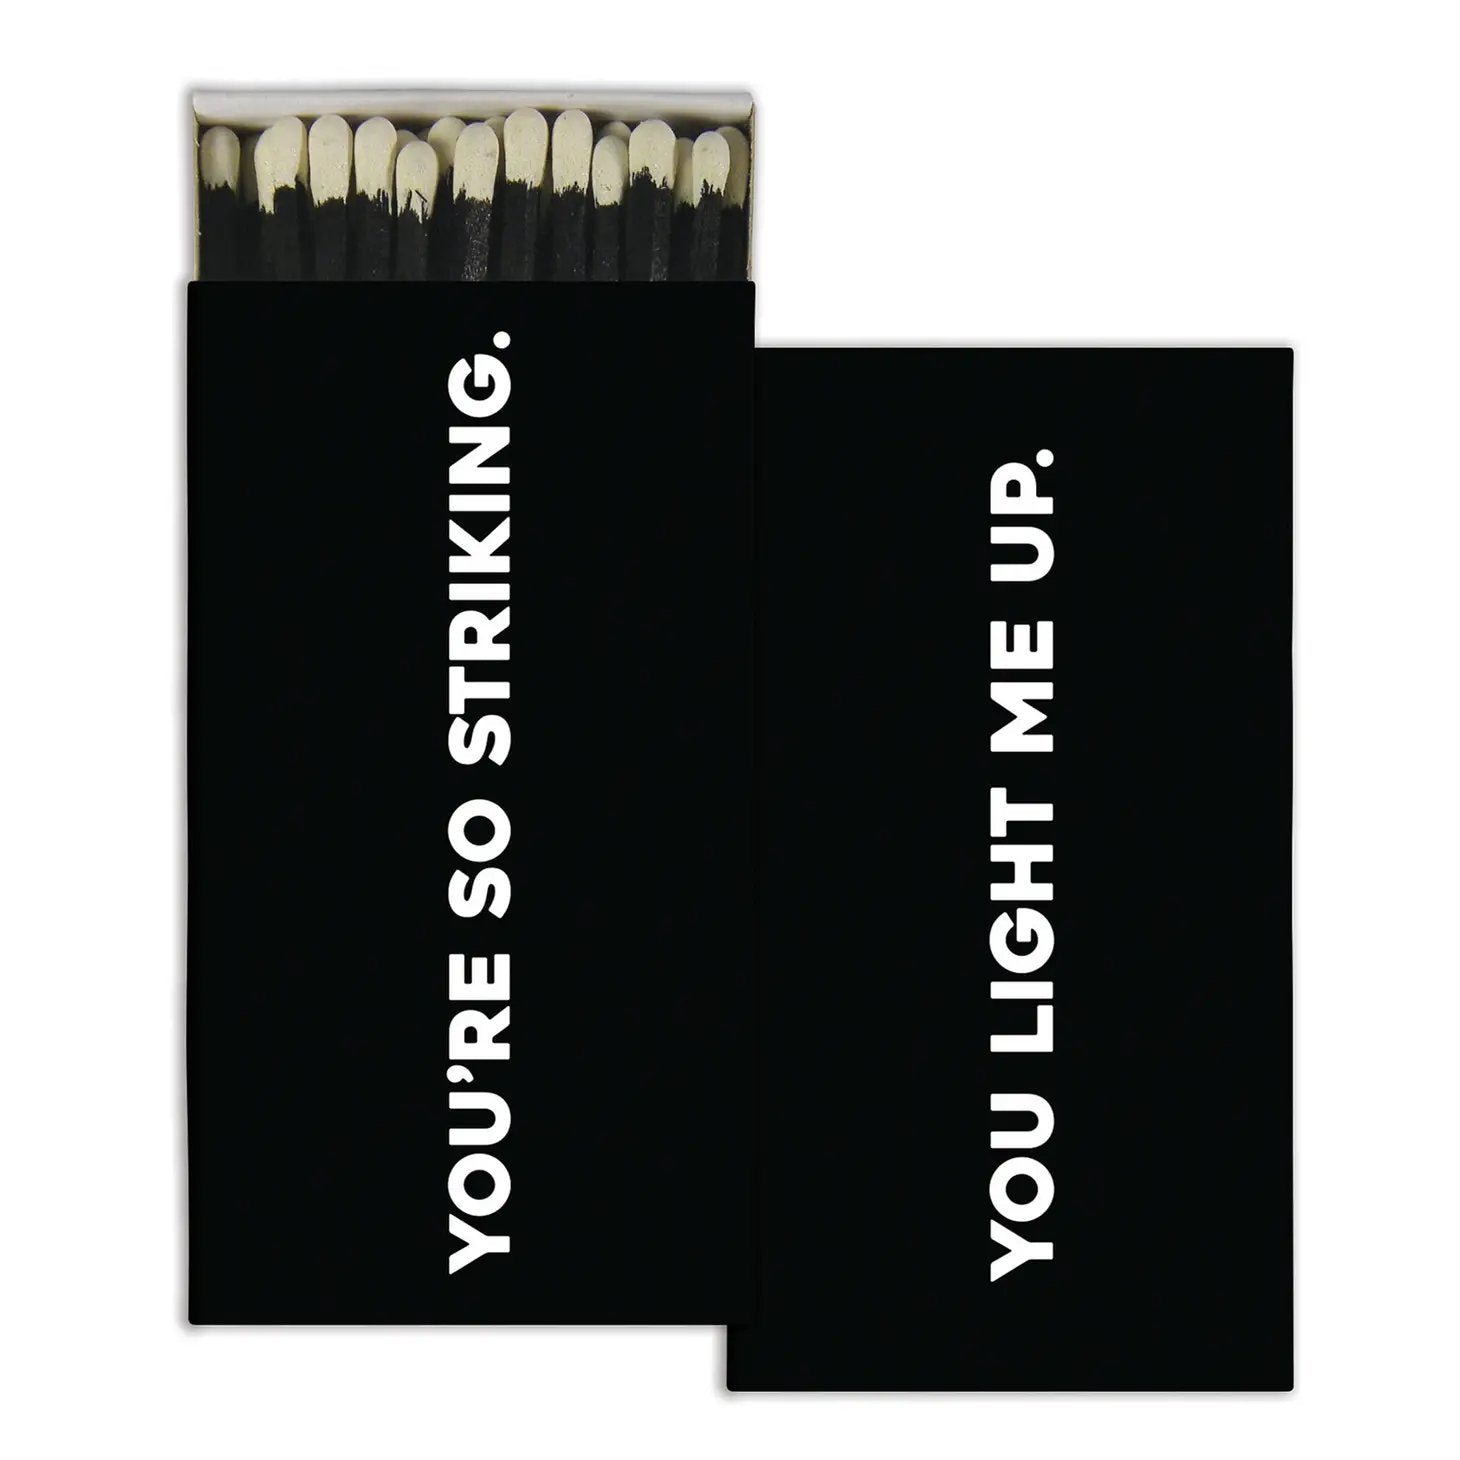 "You're So Striking" Matches - Matches